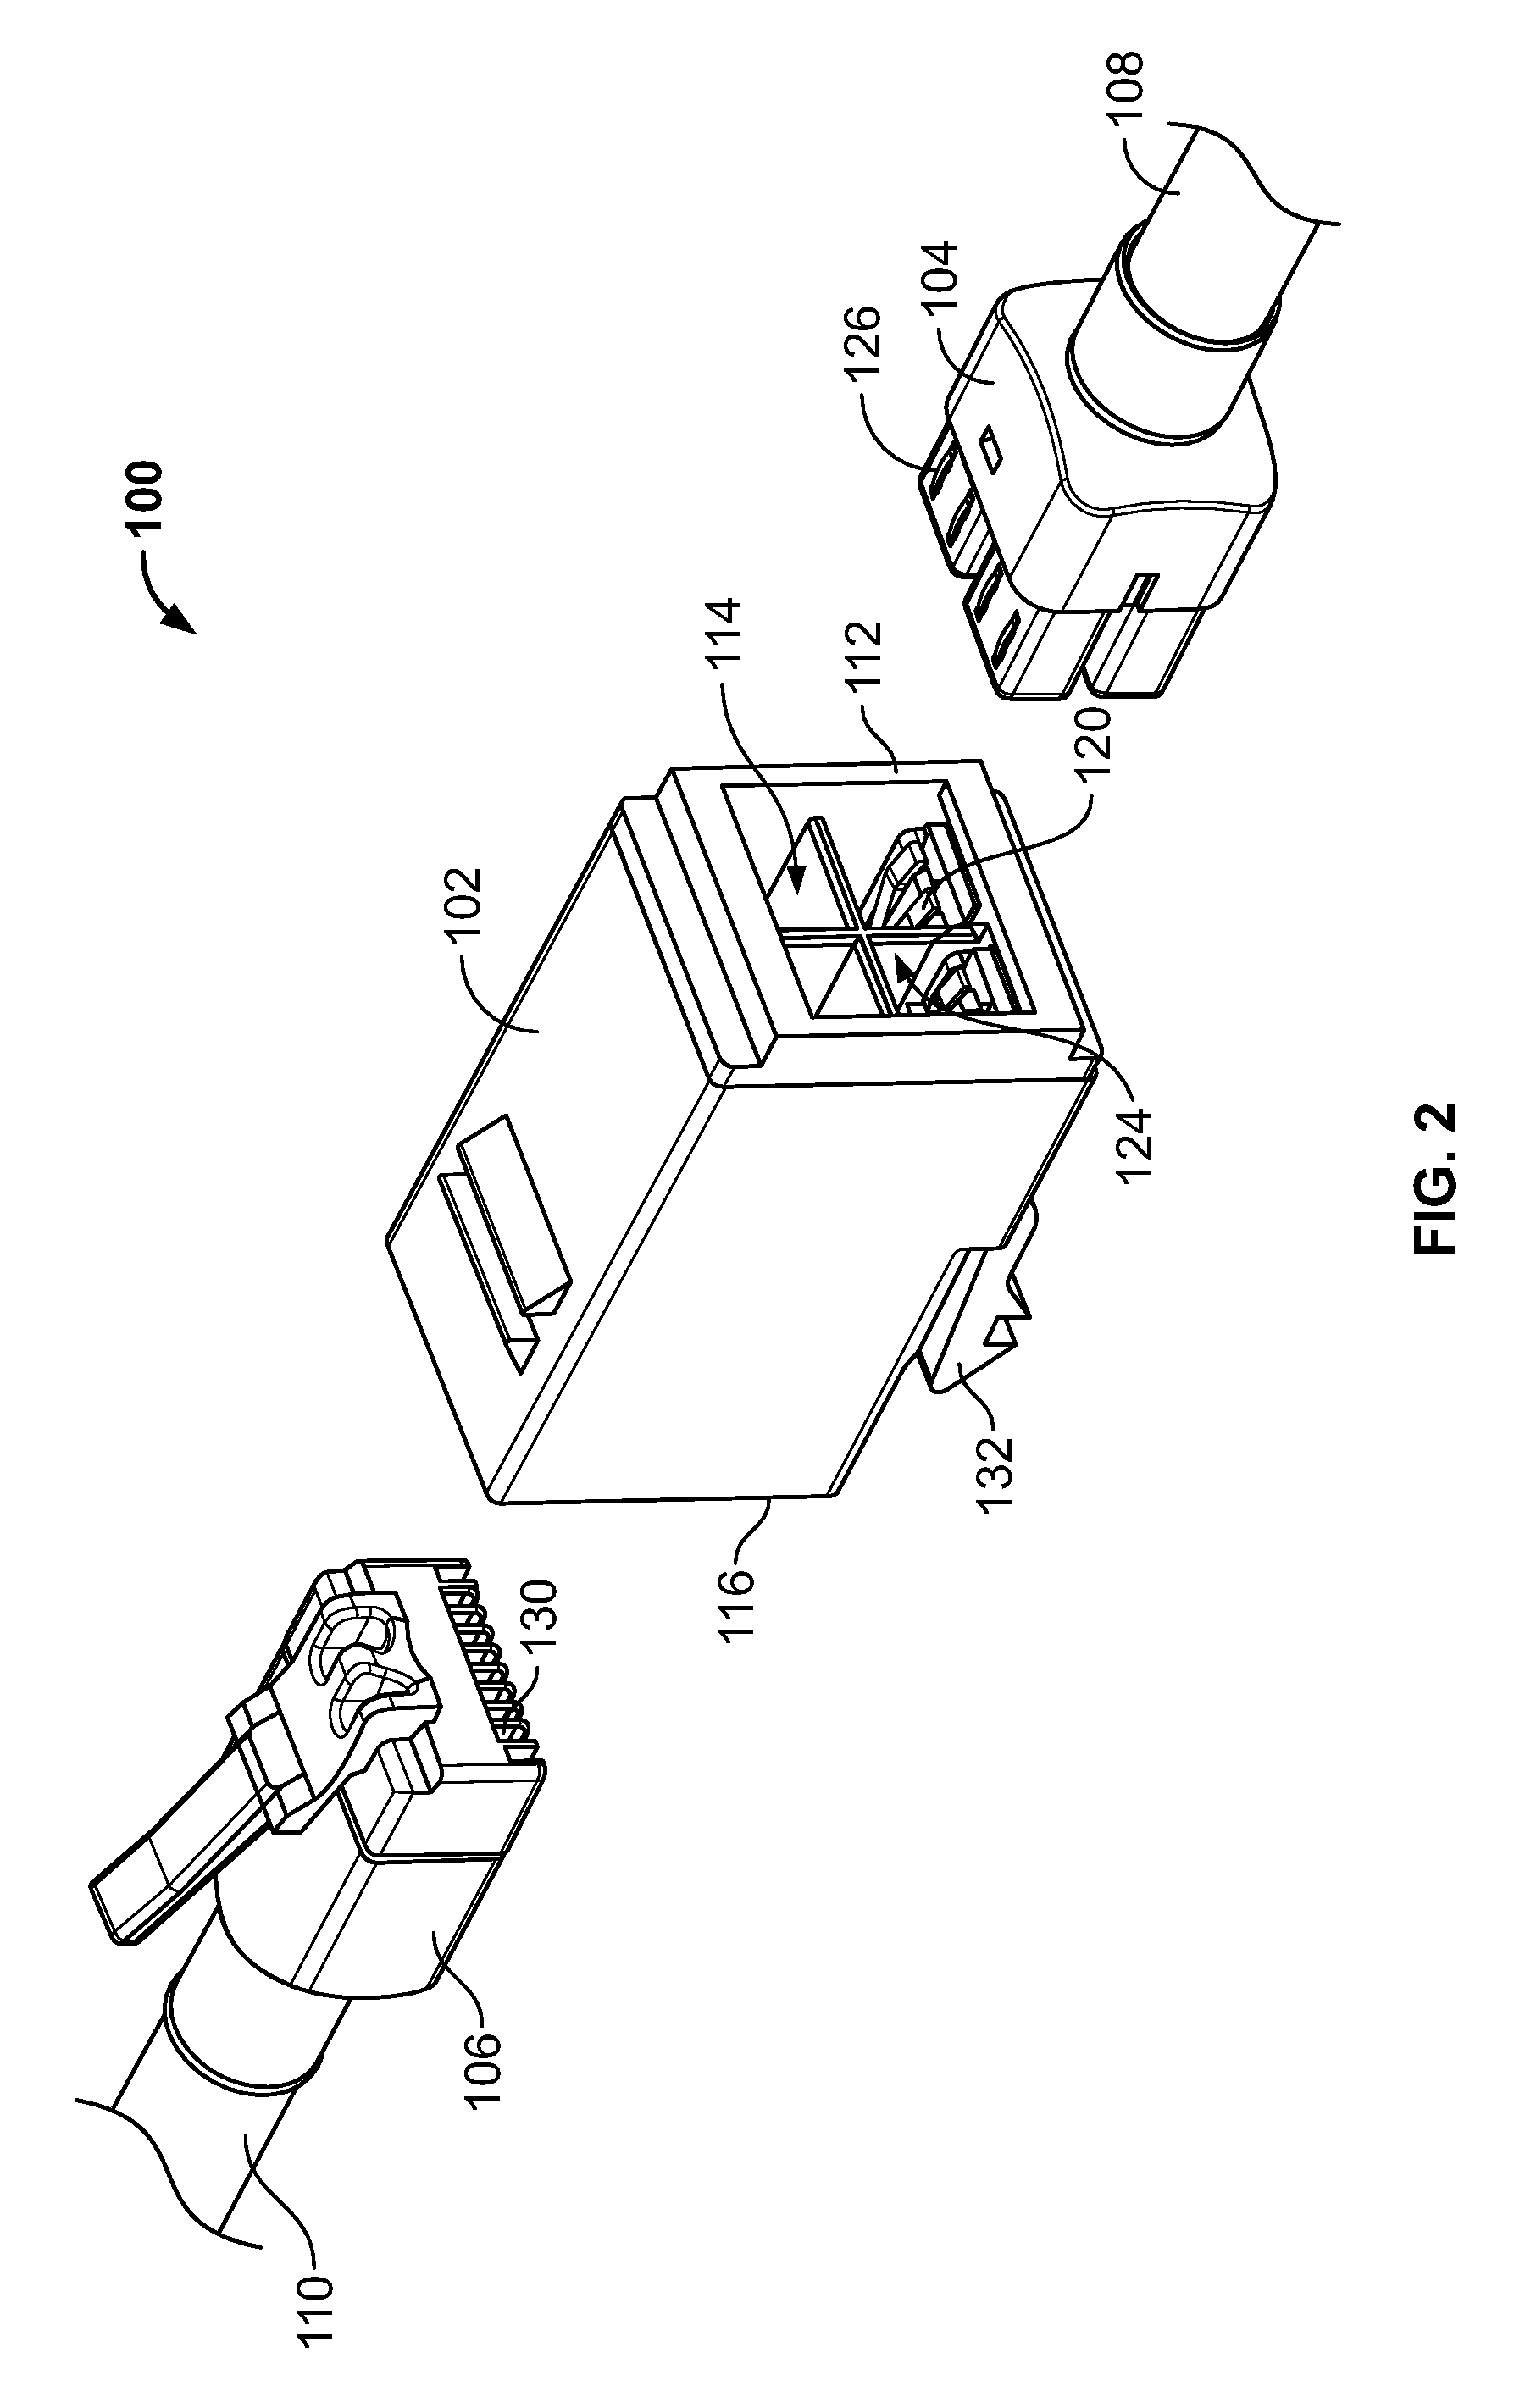 Coupler for interconnecting electrical connectors